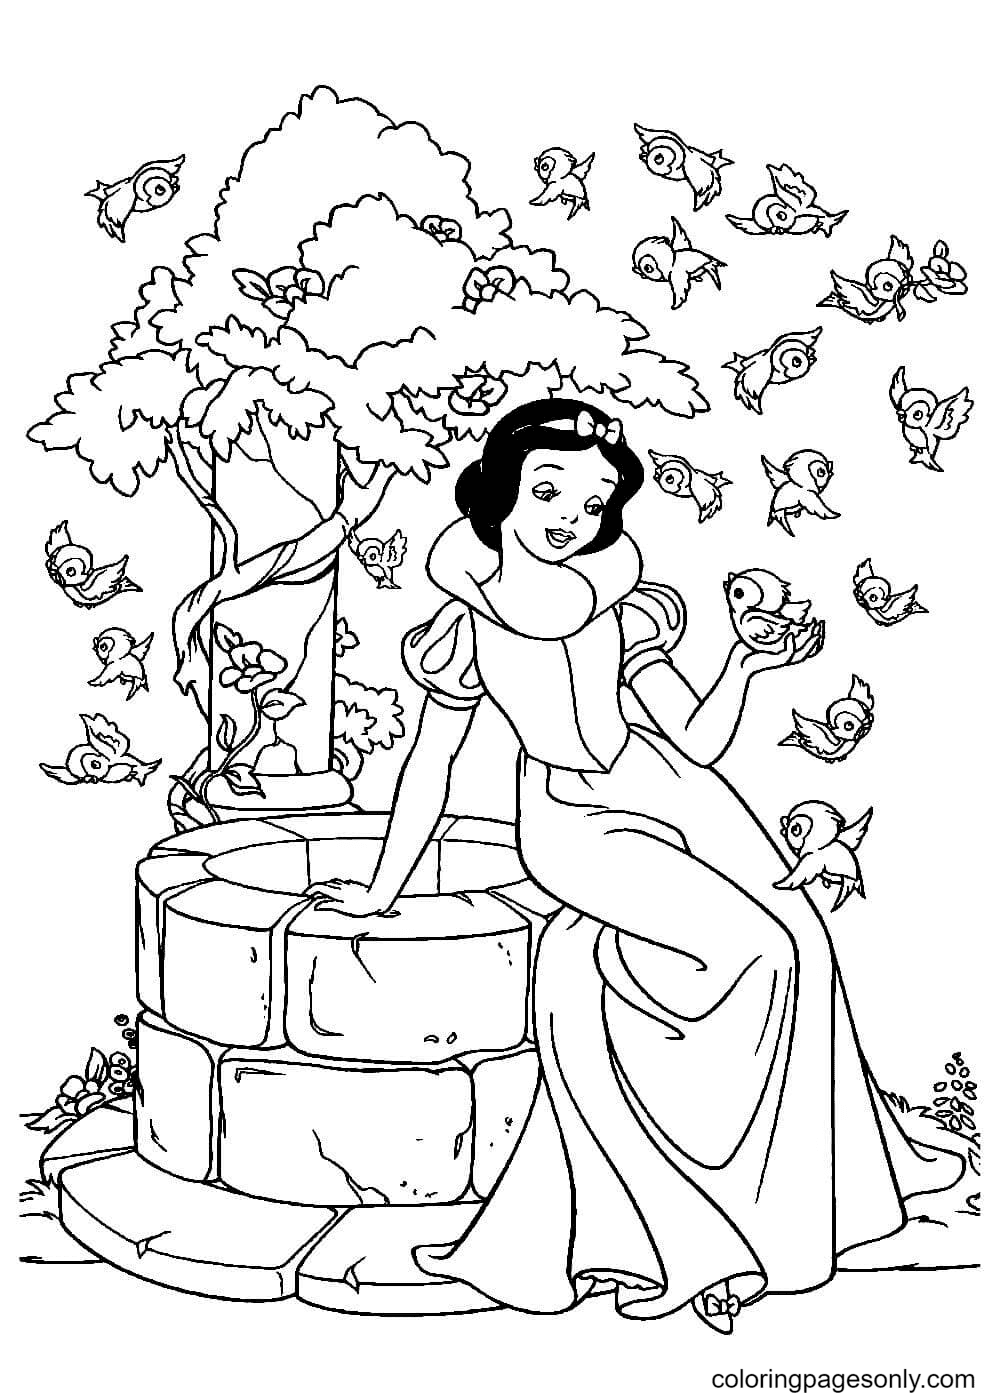 Snow White sings with a bird Coloring Pages